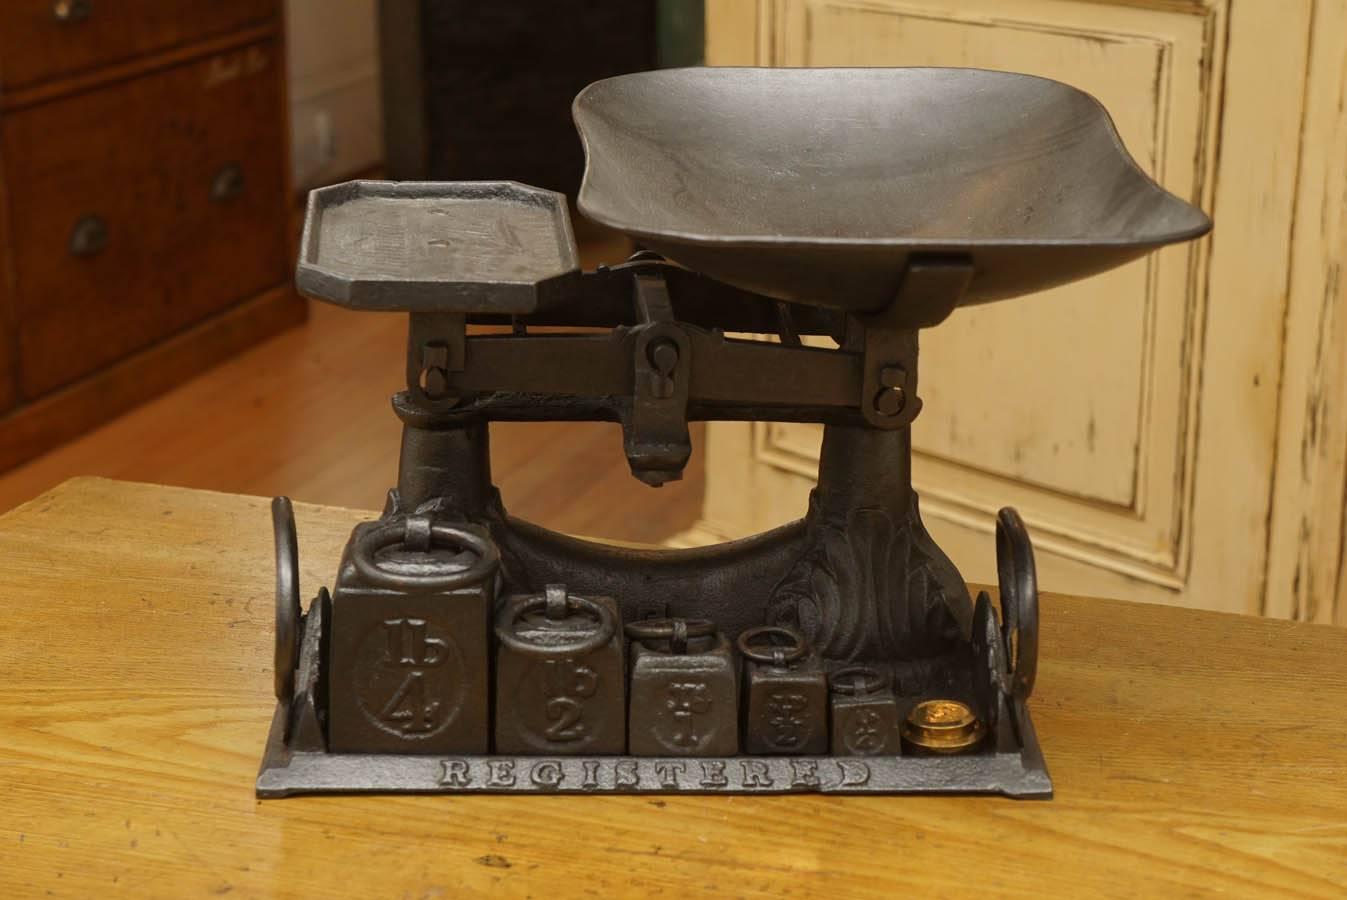 This scale is part of a very large collection of ever changing scales at painted porch. We love scales as a decorative item and this one is a beauty. Complete with original weights starting at 4 pounds. The tray is a beauty as well.